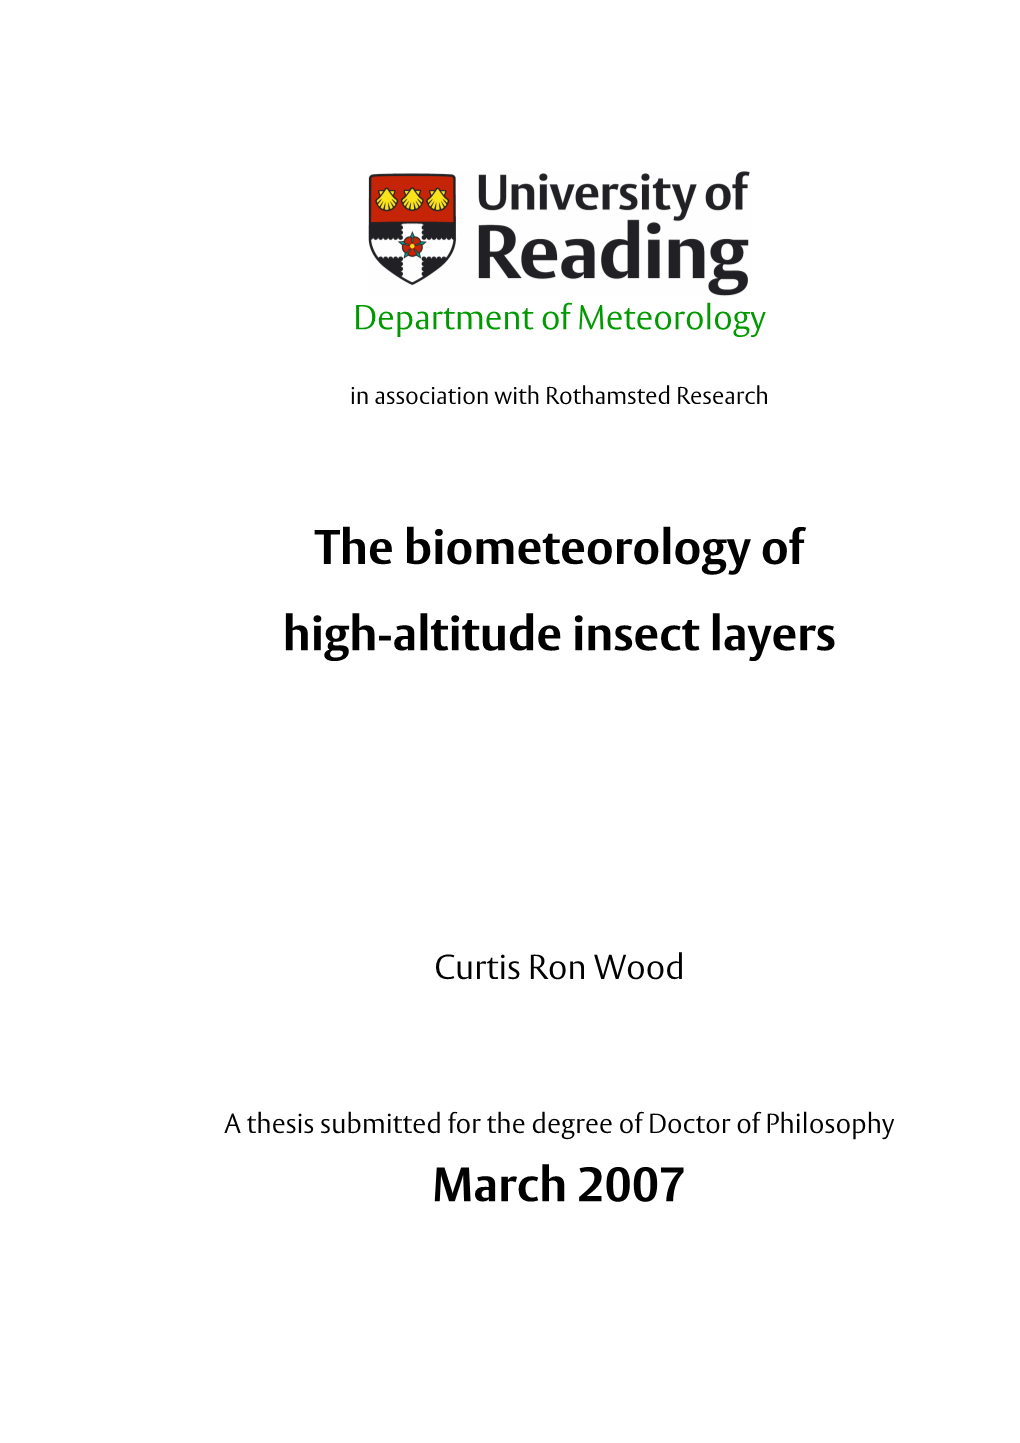 The Biometeorology of High-Altitude Insect Layers